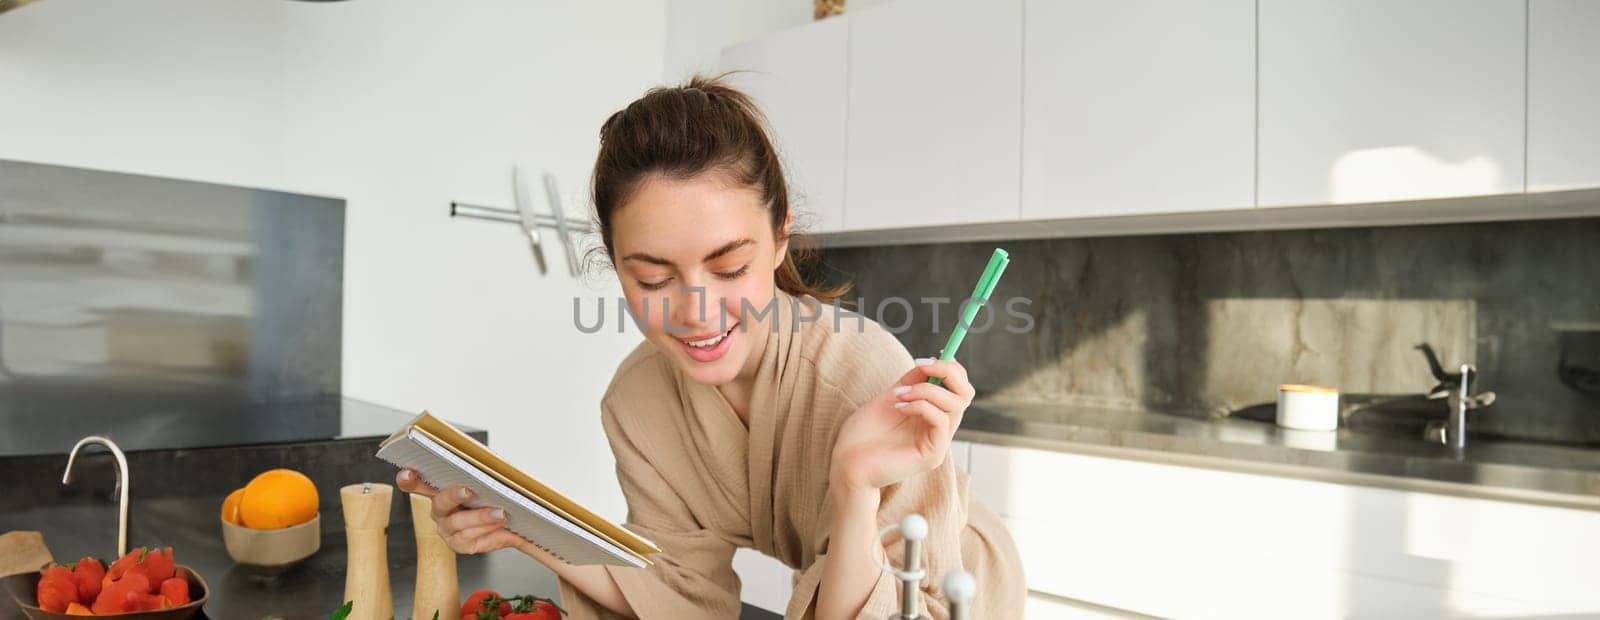 Portrait of woman checking grocery list, looking at vegetables, holding notebook, reading recipe while cooking meal in the kitchen, chopping tomatoes and zucchini.